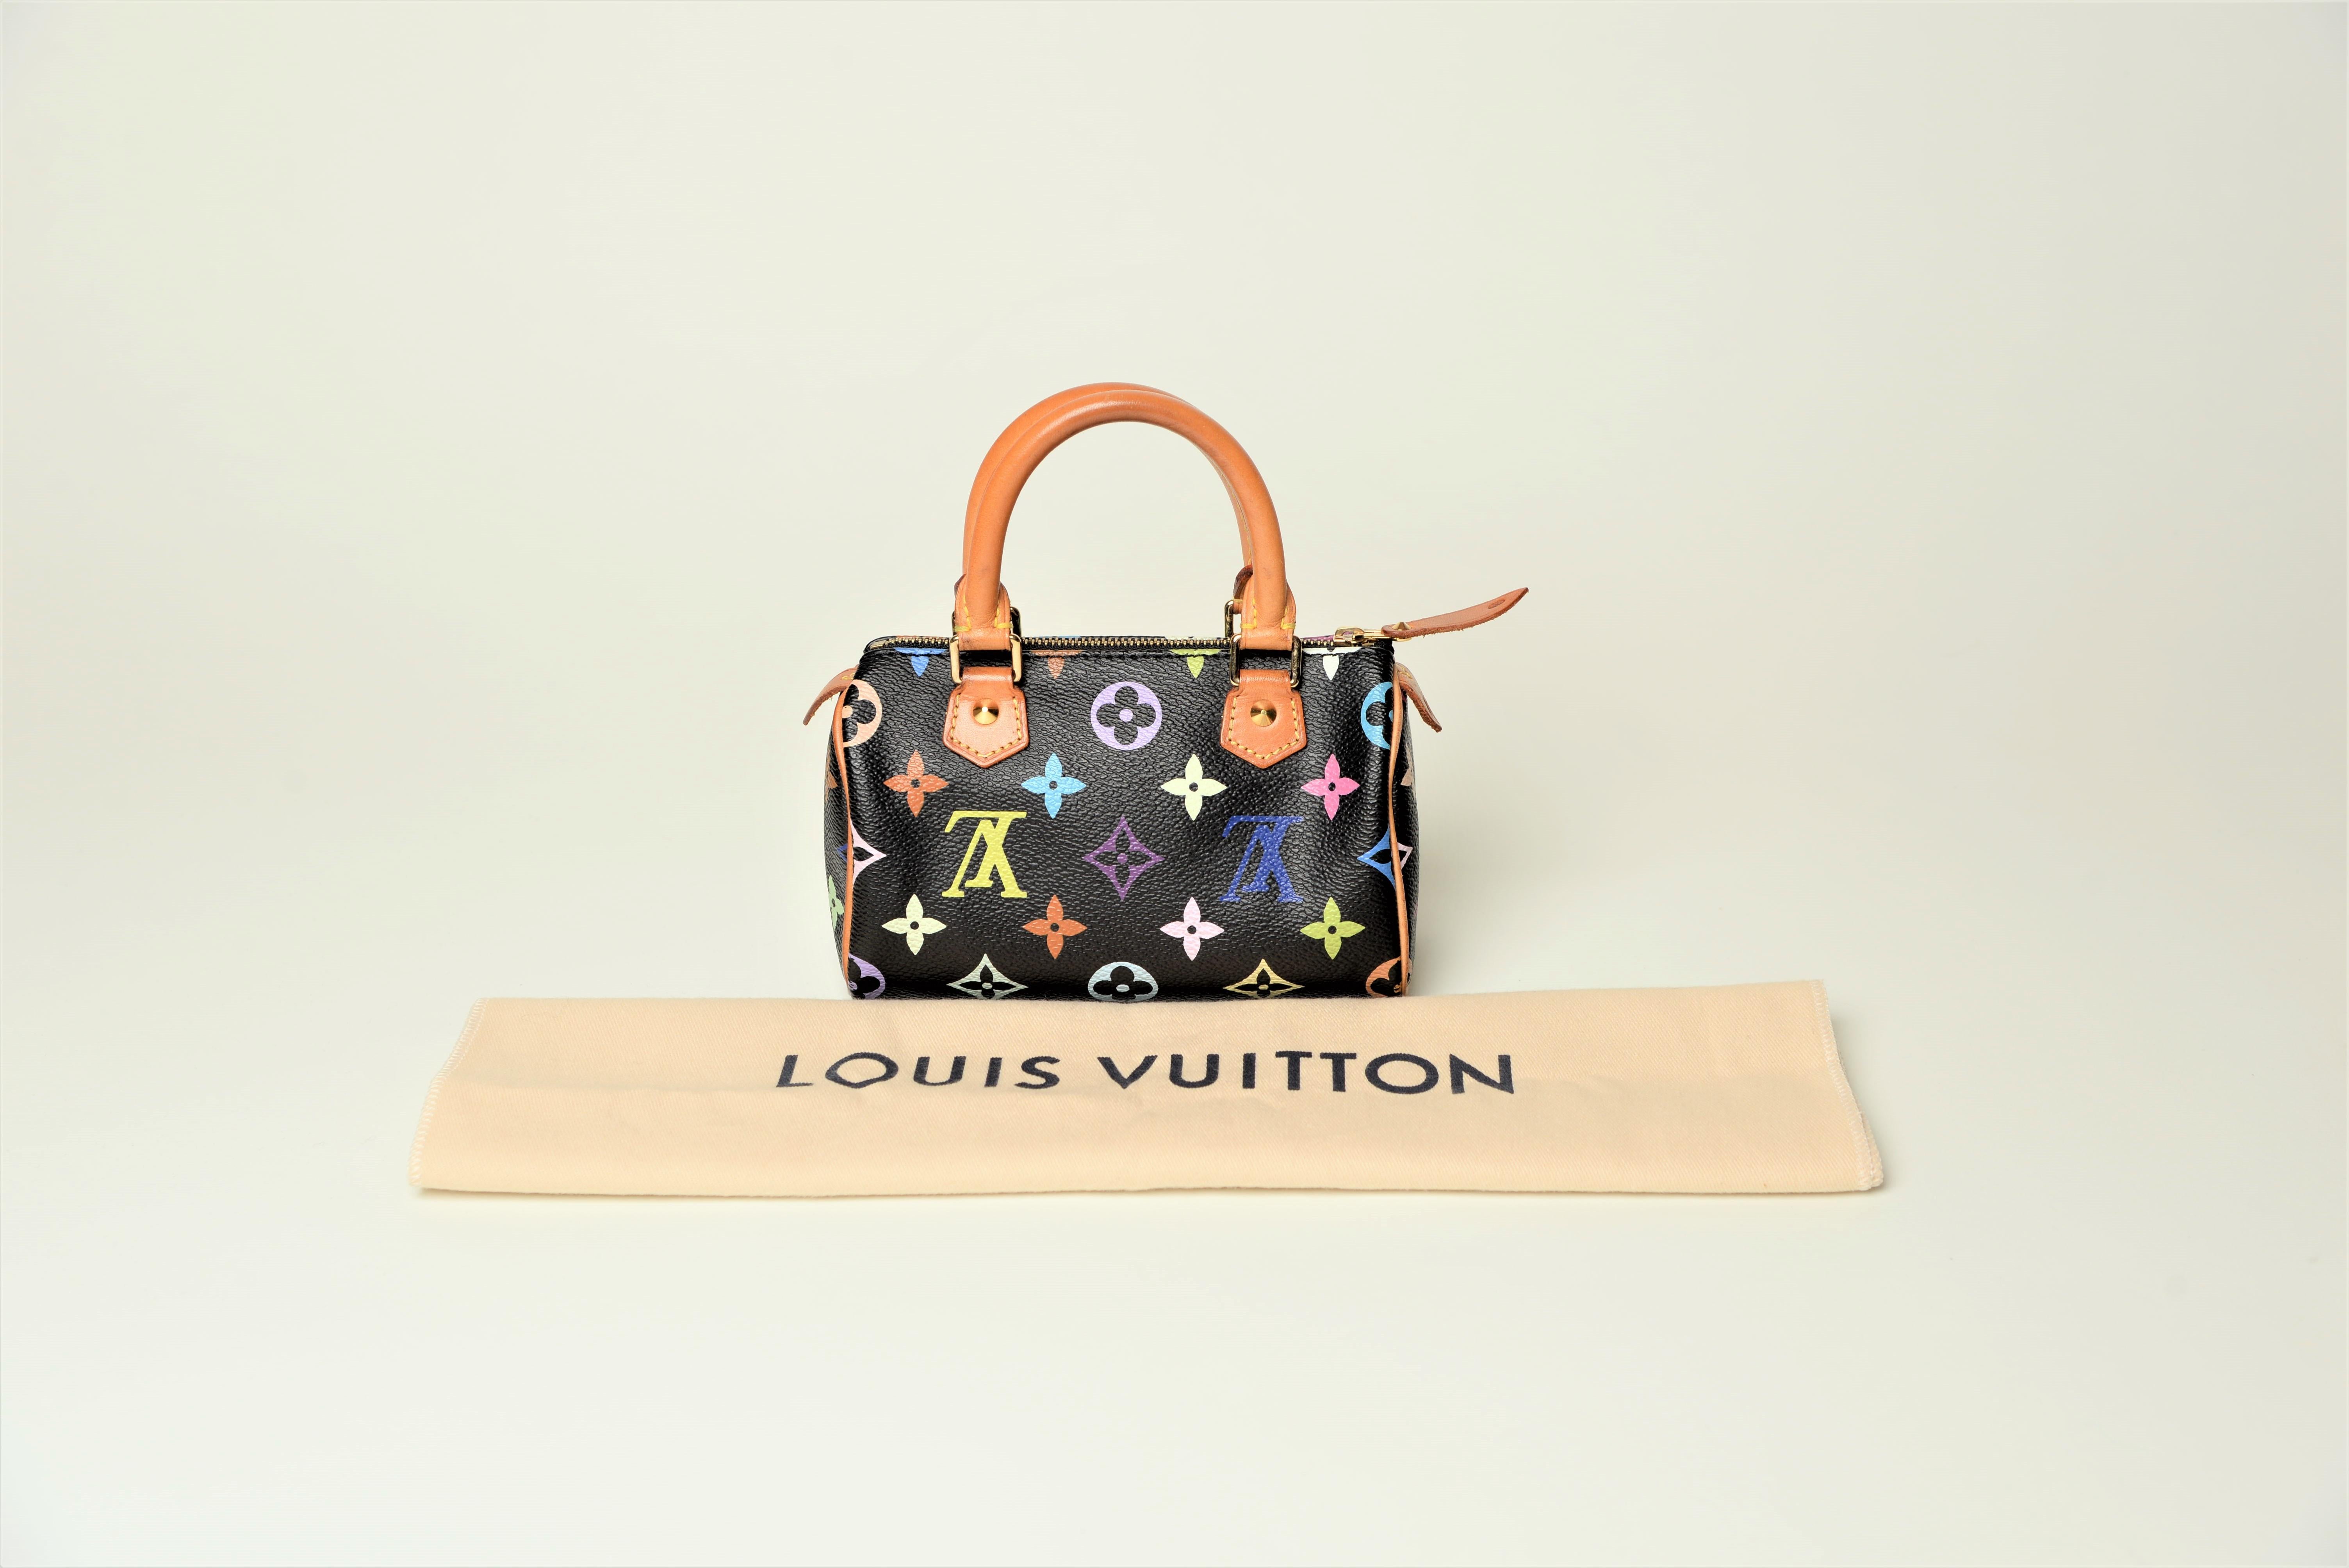 From the collection of SAVINETI we offer this rare Louis Vuitton Mini Speedy Multicolor:
-	Brand: Louis Vuitton
-	Model: Mini Speedy Multicolor (Limited Edition Murakami Collection)
-       Year: 2003 
-       Code: TH0093
-	Condition: